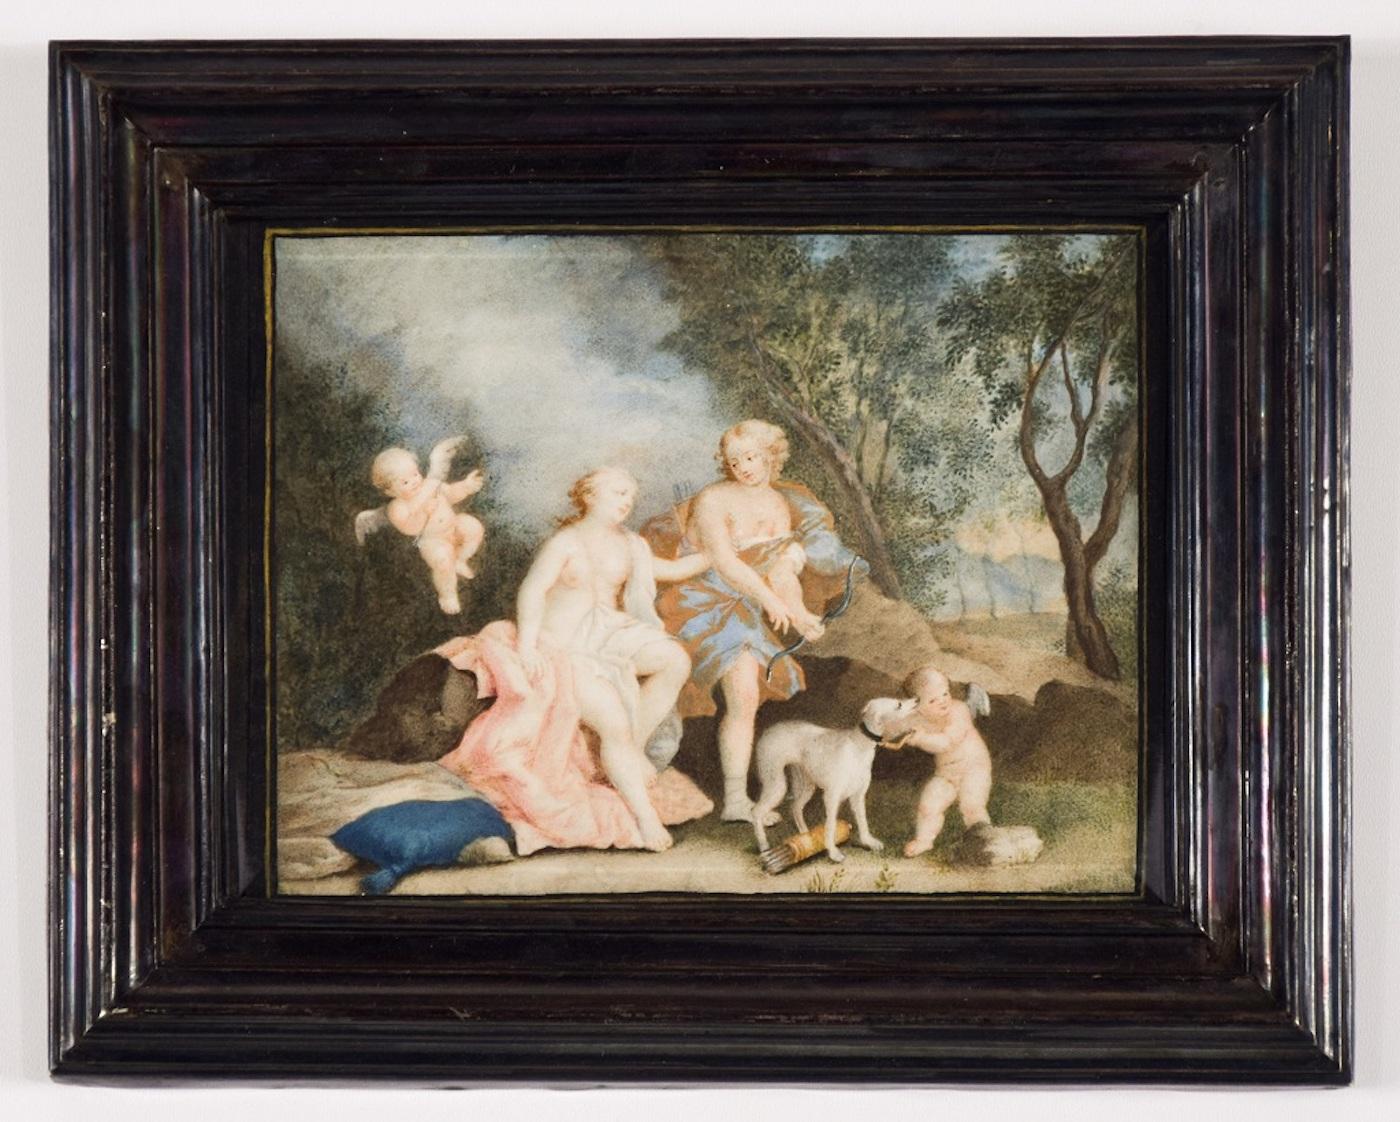 Mythological Scene - Oil on Board - 18th Century - Painting by Unknown